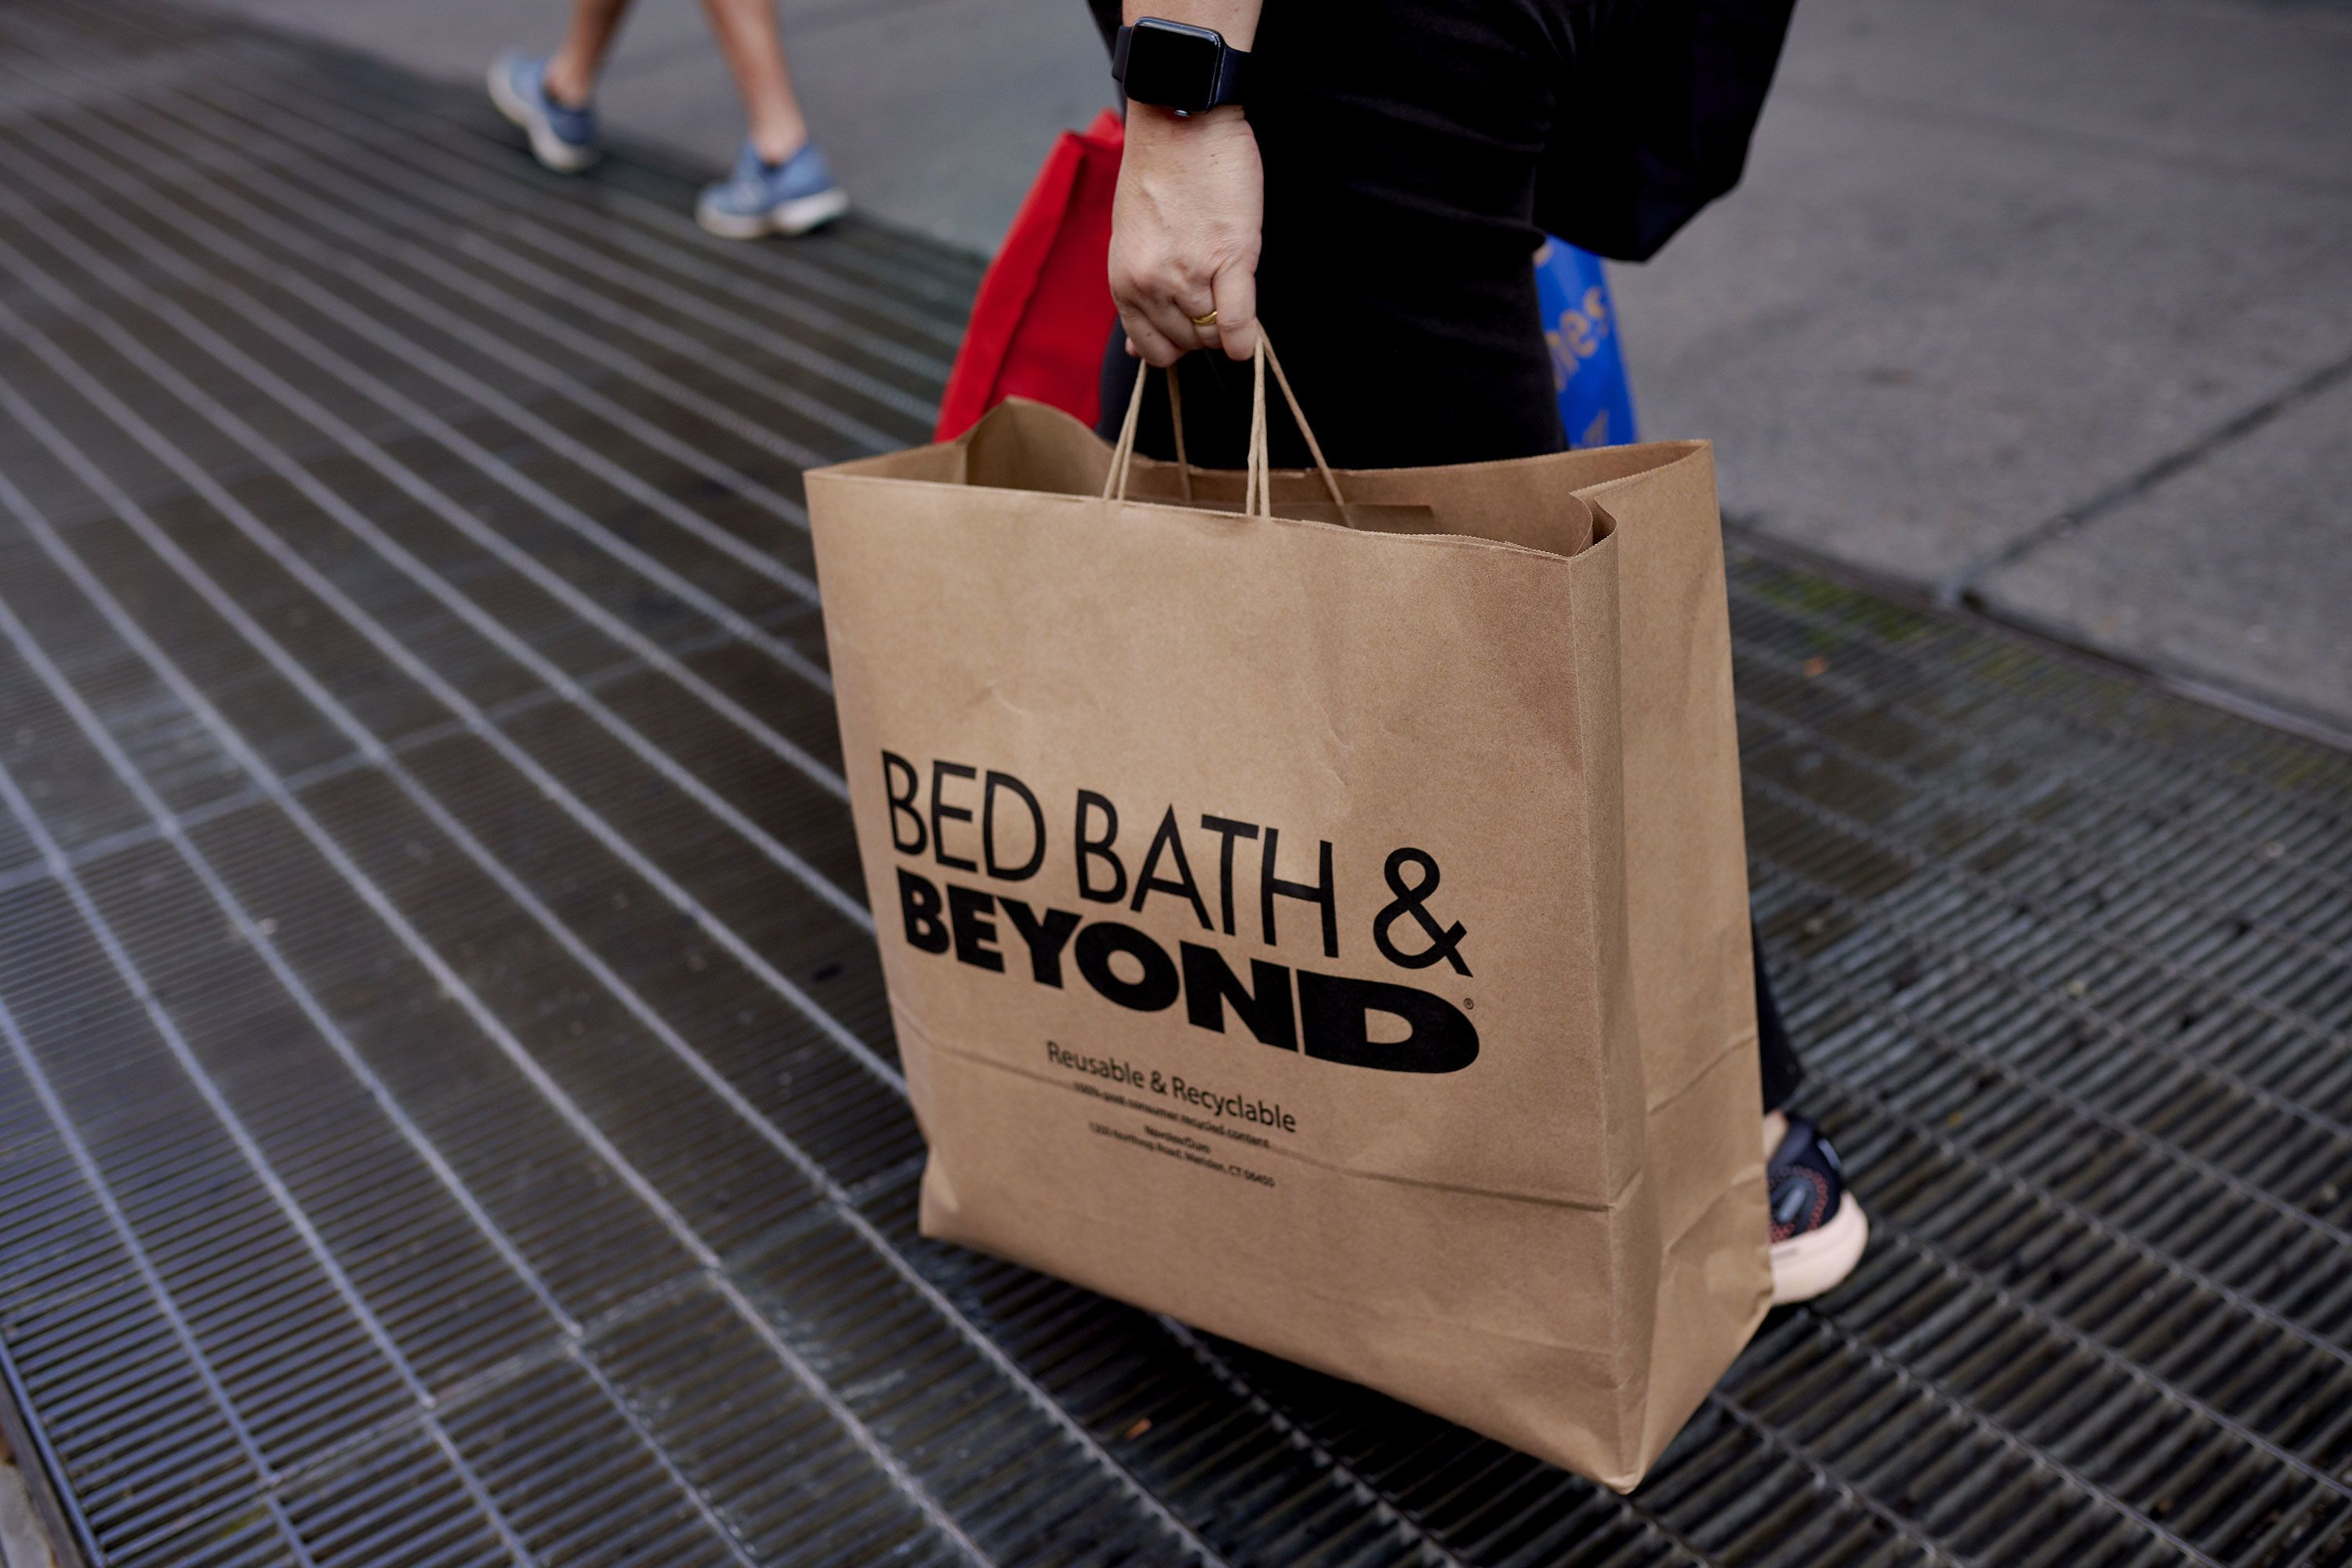 New Simple Human Packaging Launches at Bed Bath & Beyond